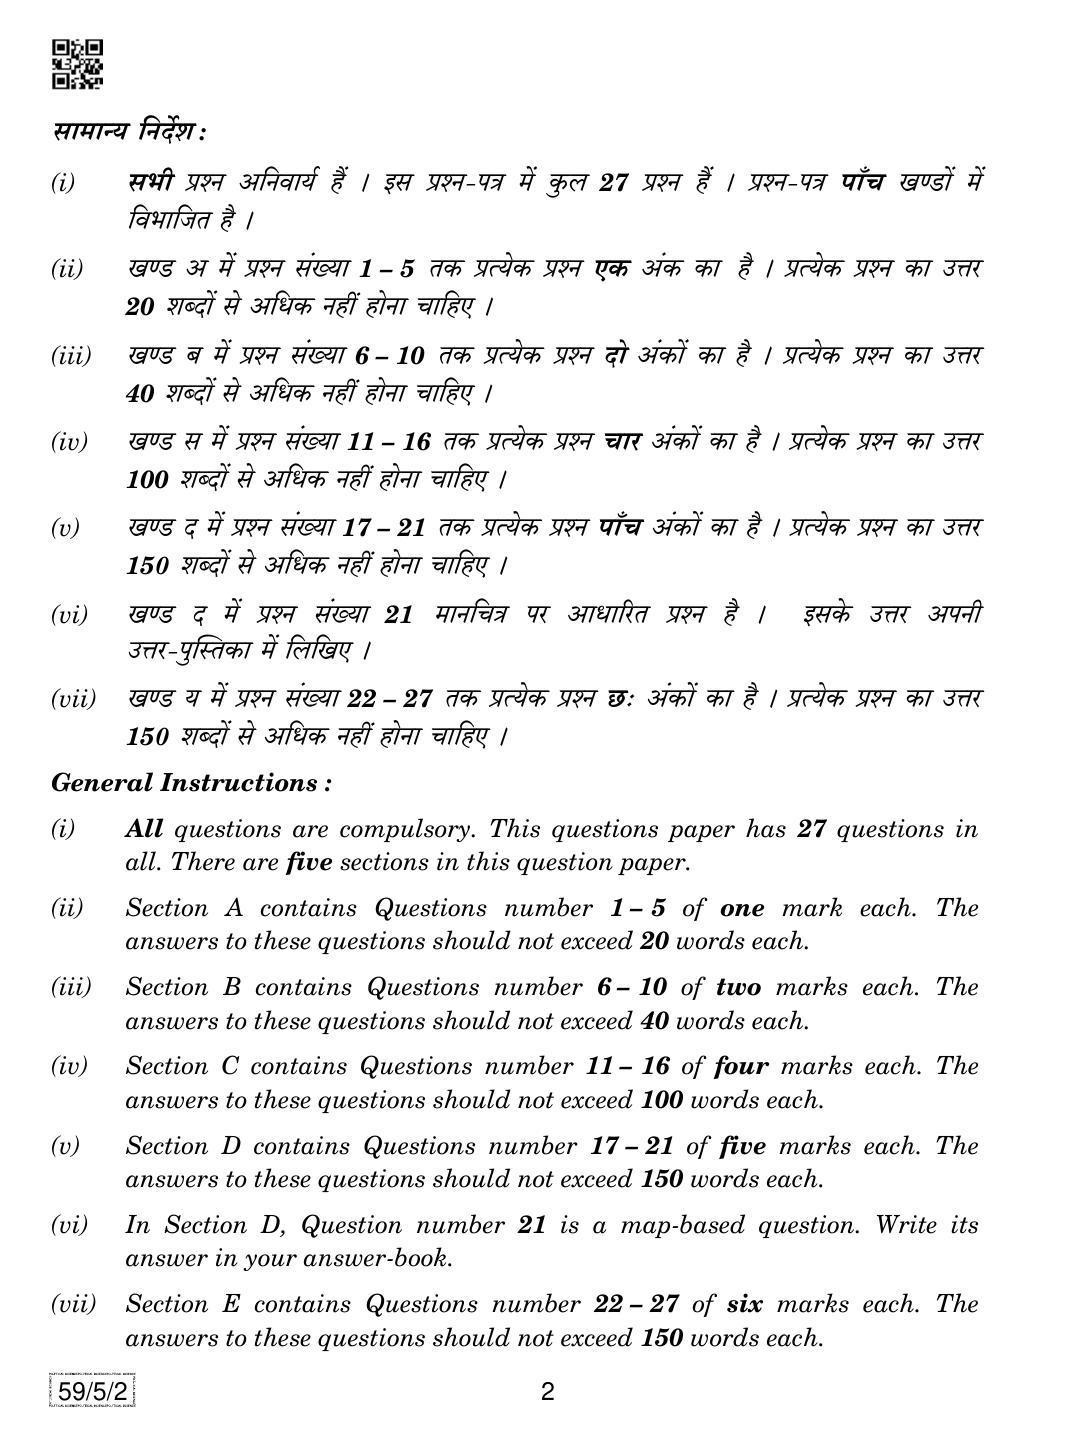 CBSE Class 12 59-5-2 Political Science 2019 Question Paper - Page 2